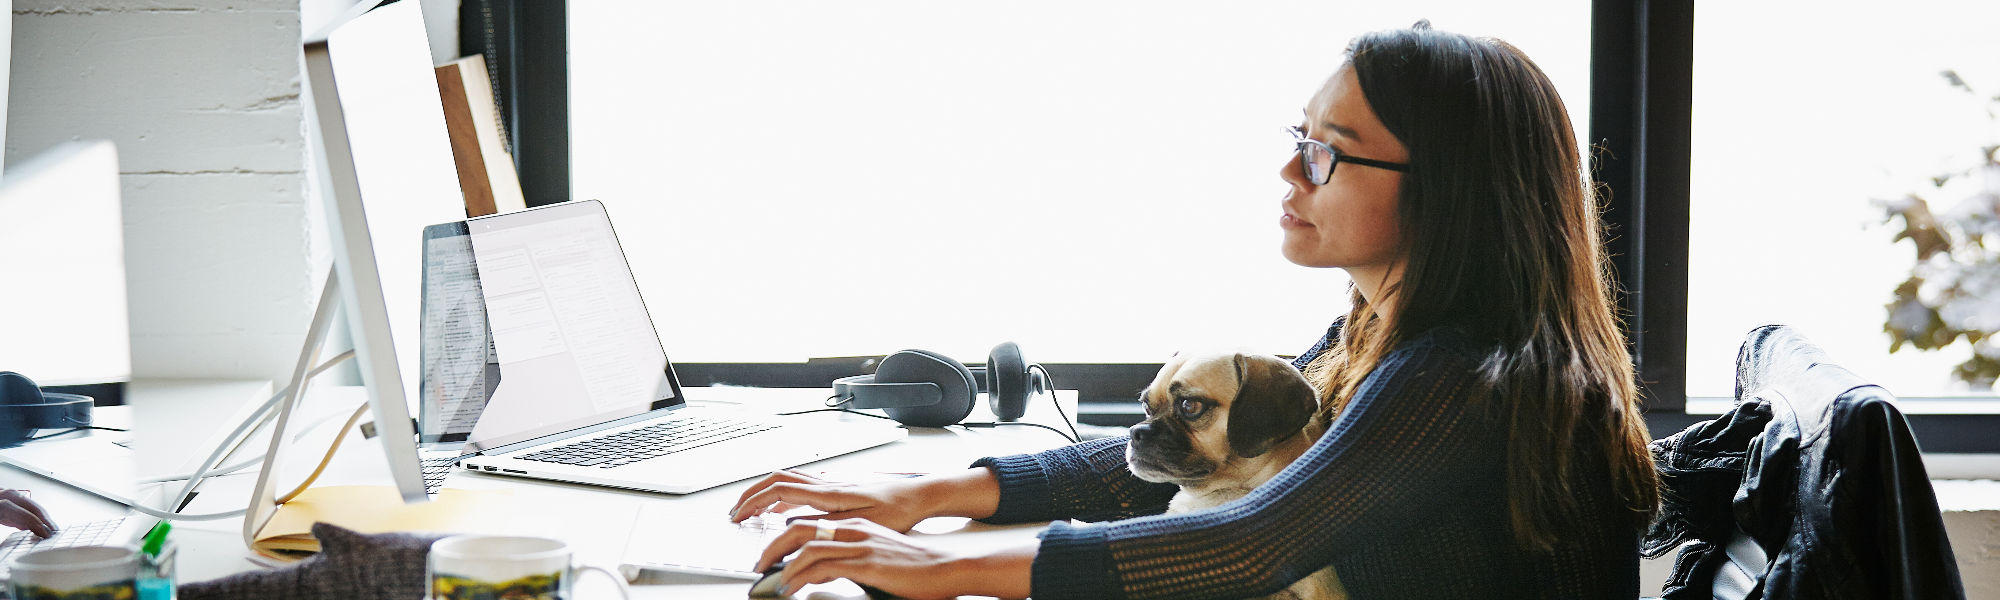 girl working in office with laptop and dog on her lap